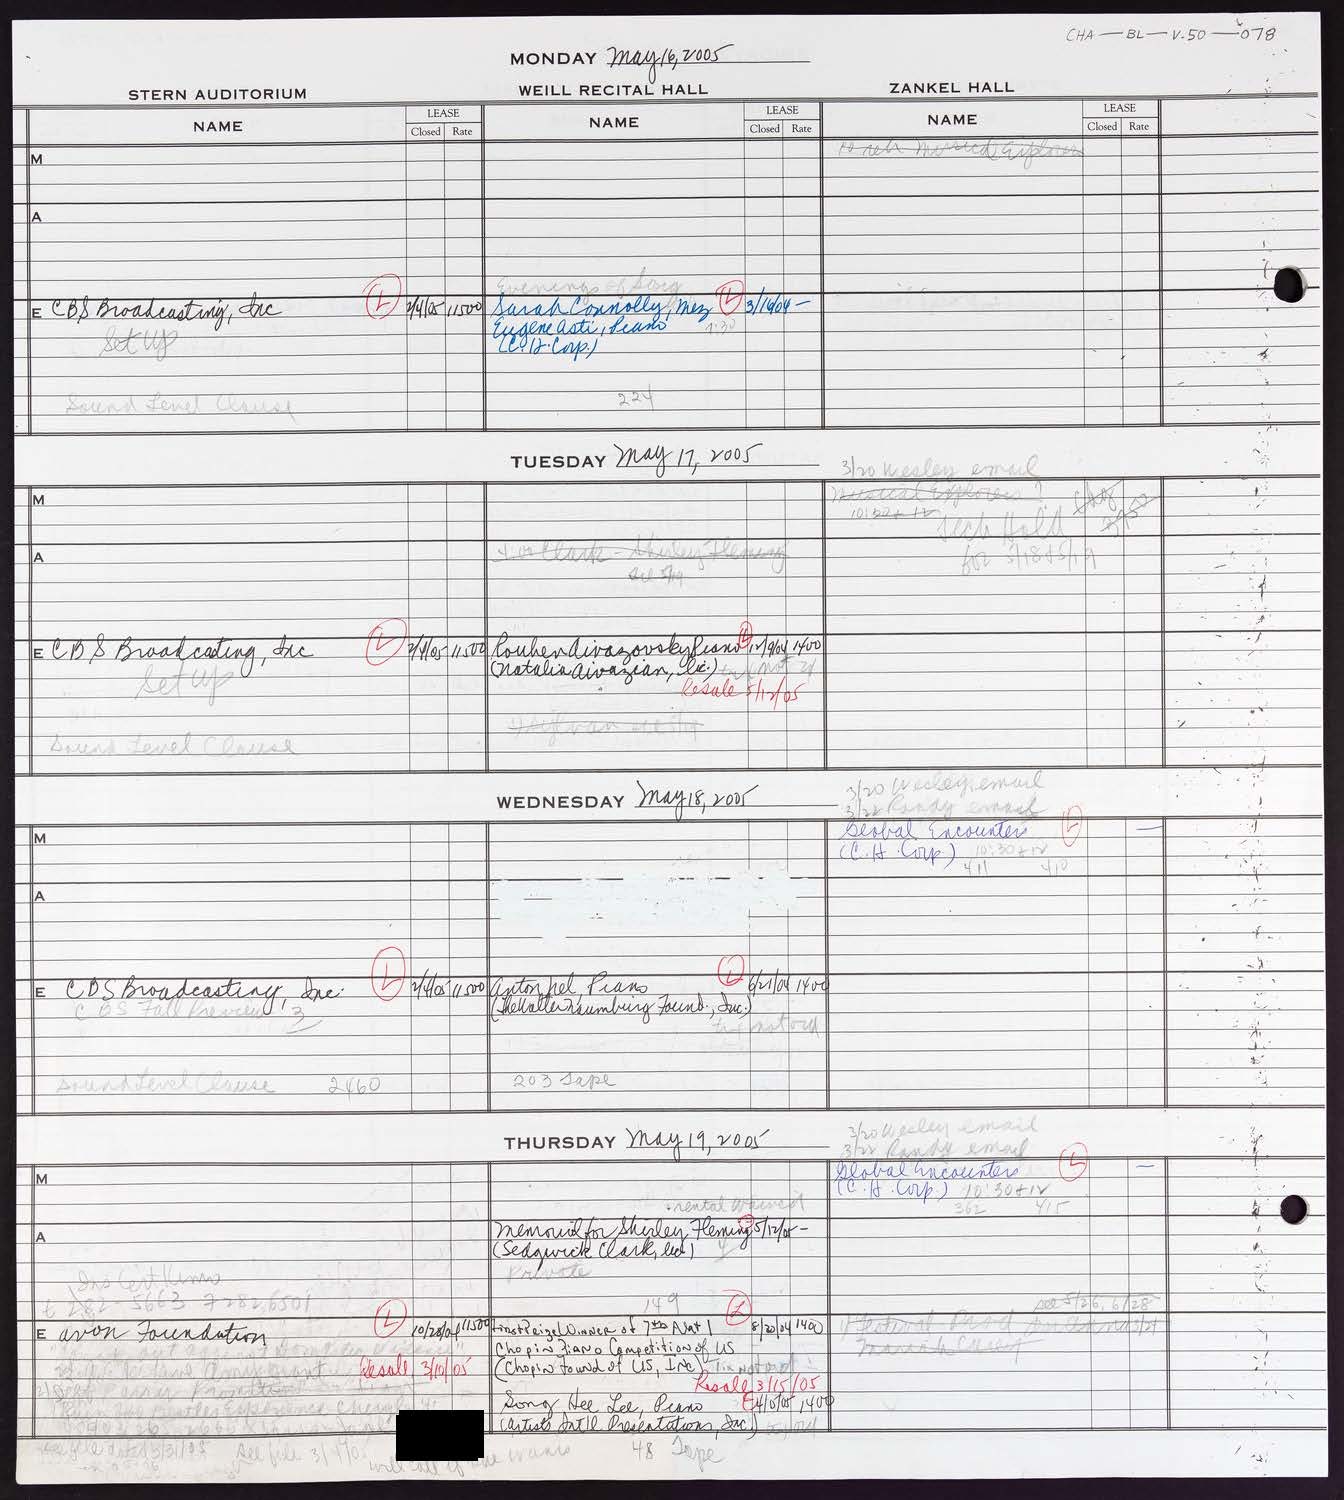 Carnegie Hall Booking Ledger, volume 50, page 78